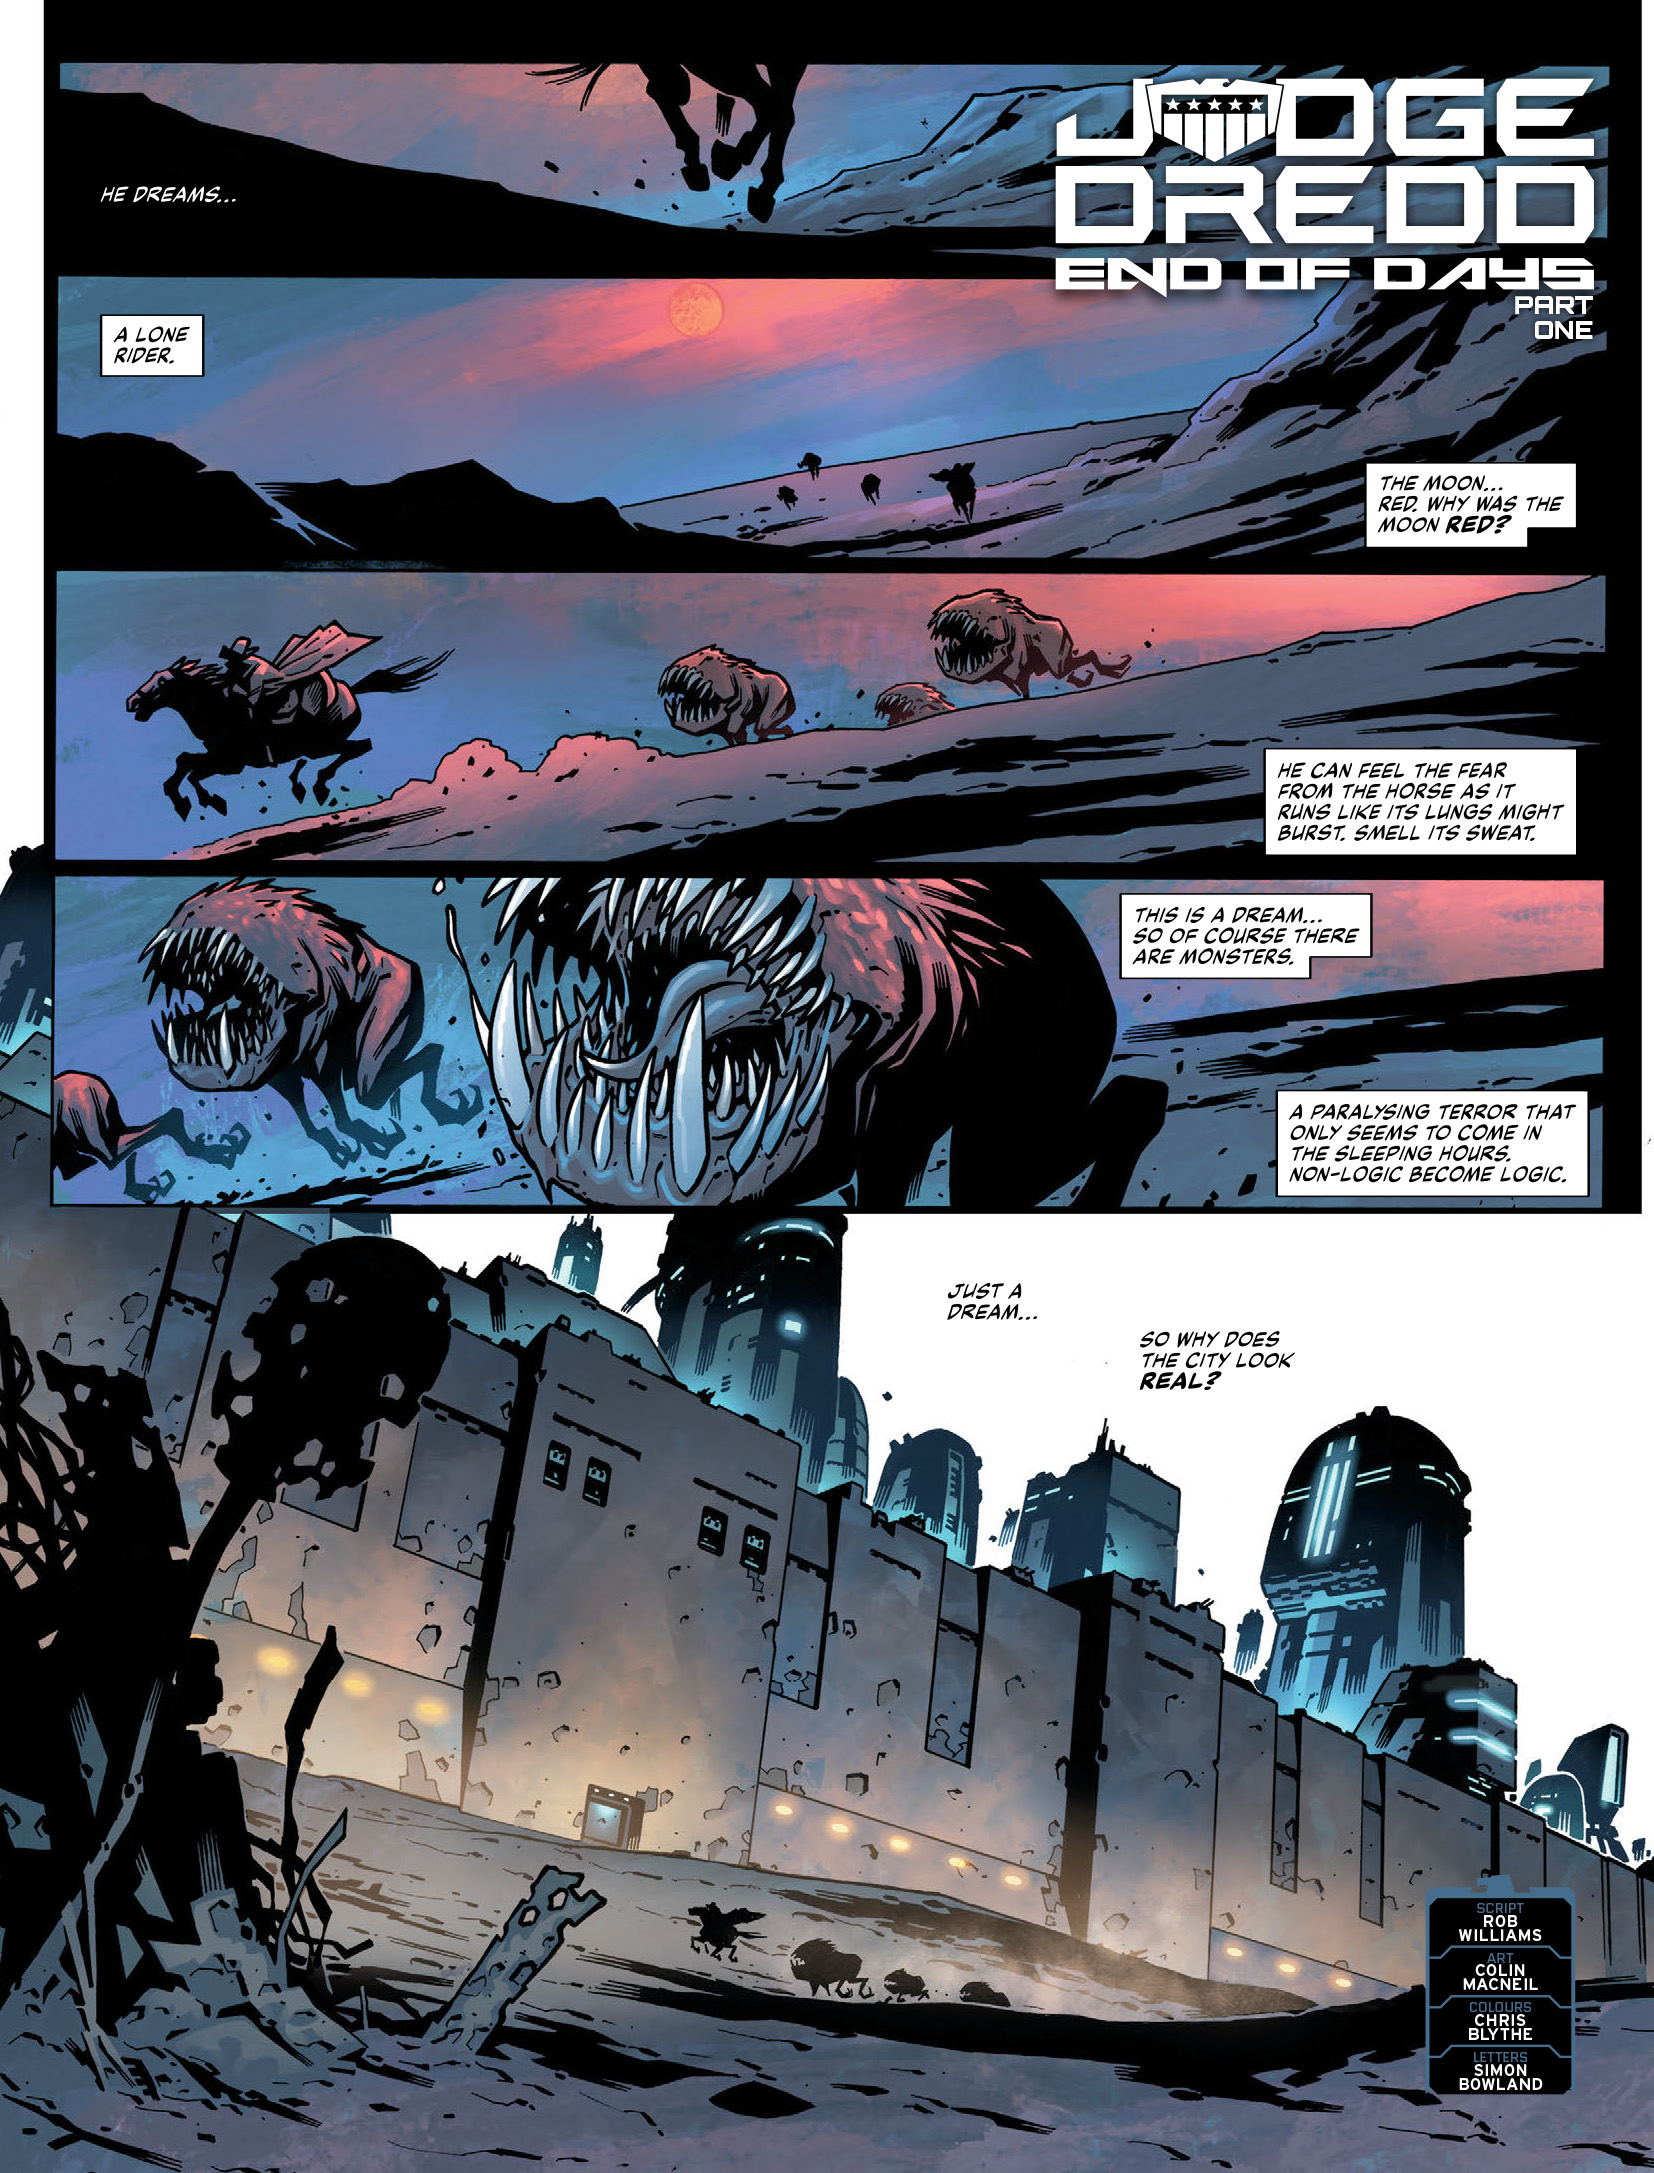 2000 AD: Chapter 2184 - Page 3